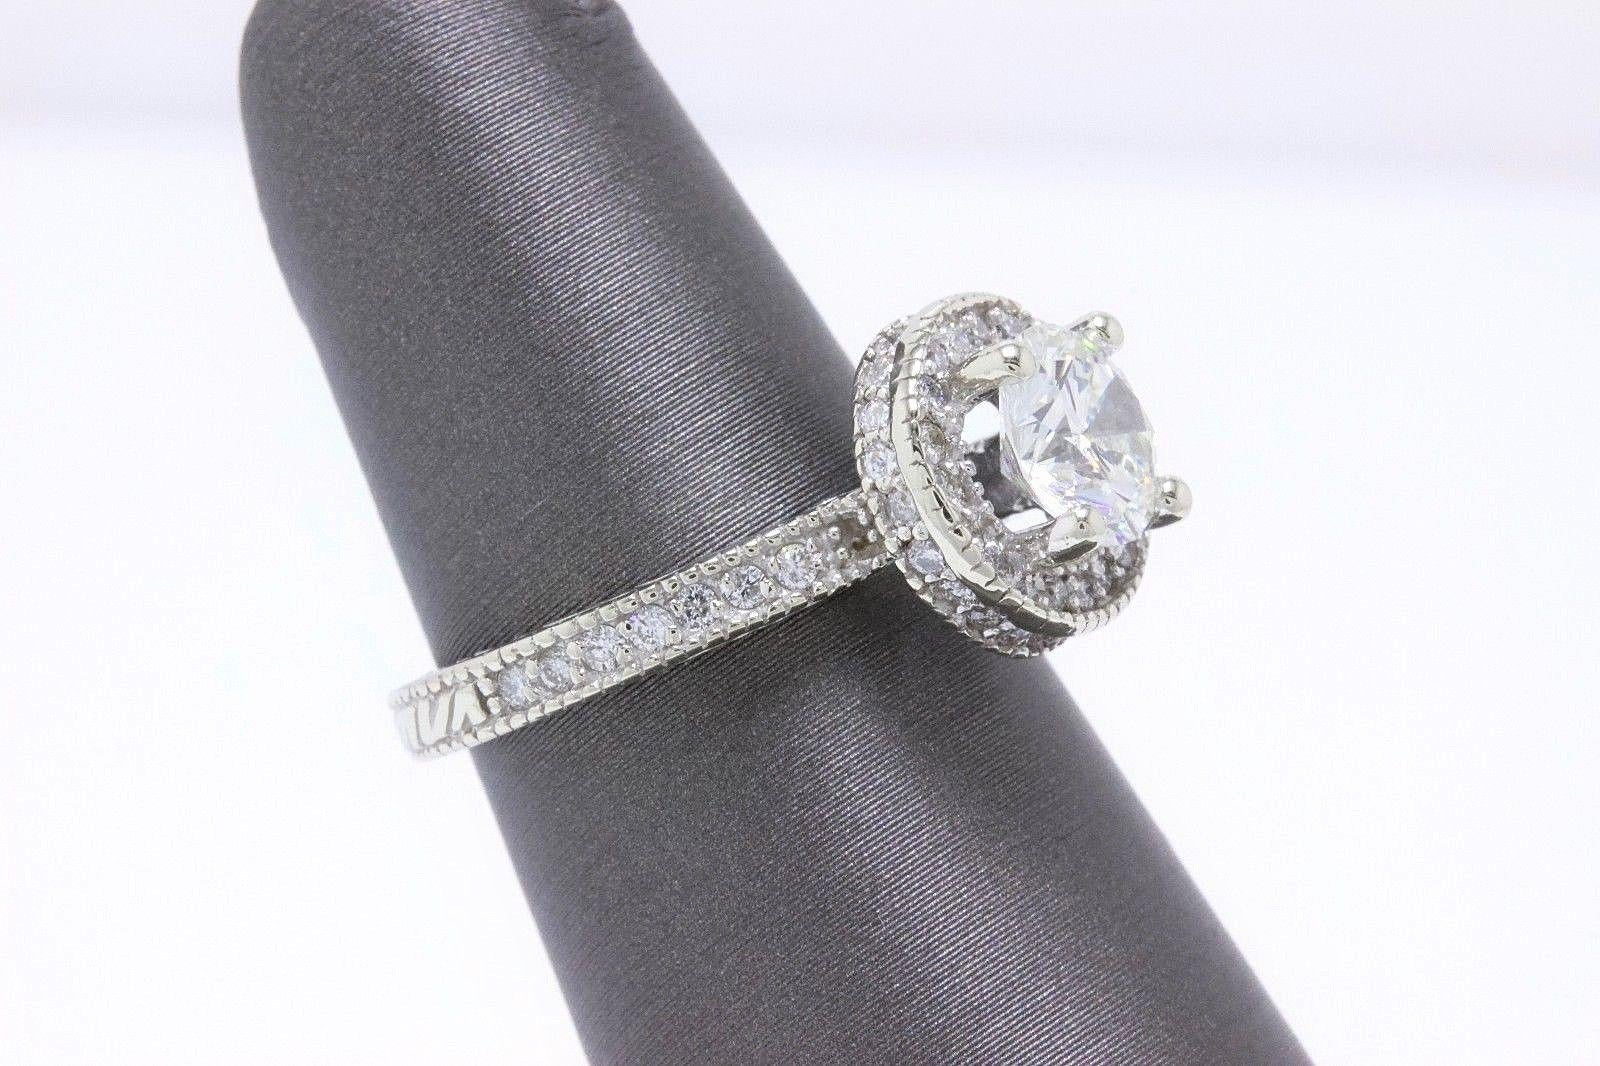 Leo Diamond Engagement Ring Round Cut 1.62 TCW 14K White Gold Halo Setting In Excellent Condition For Sale In San Diego, CA